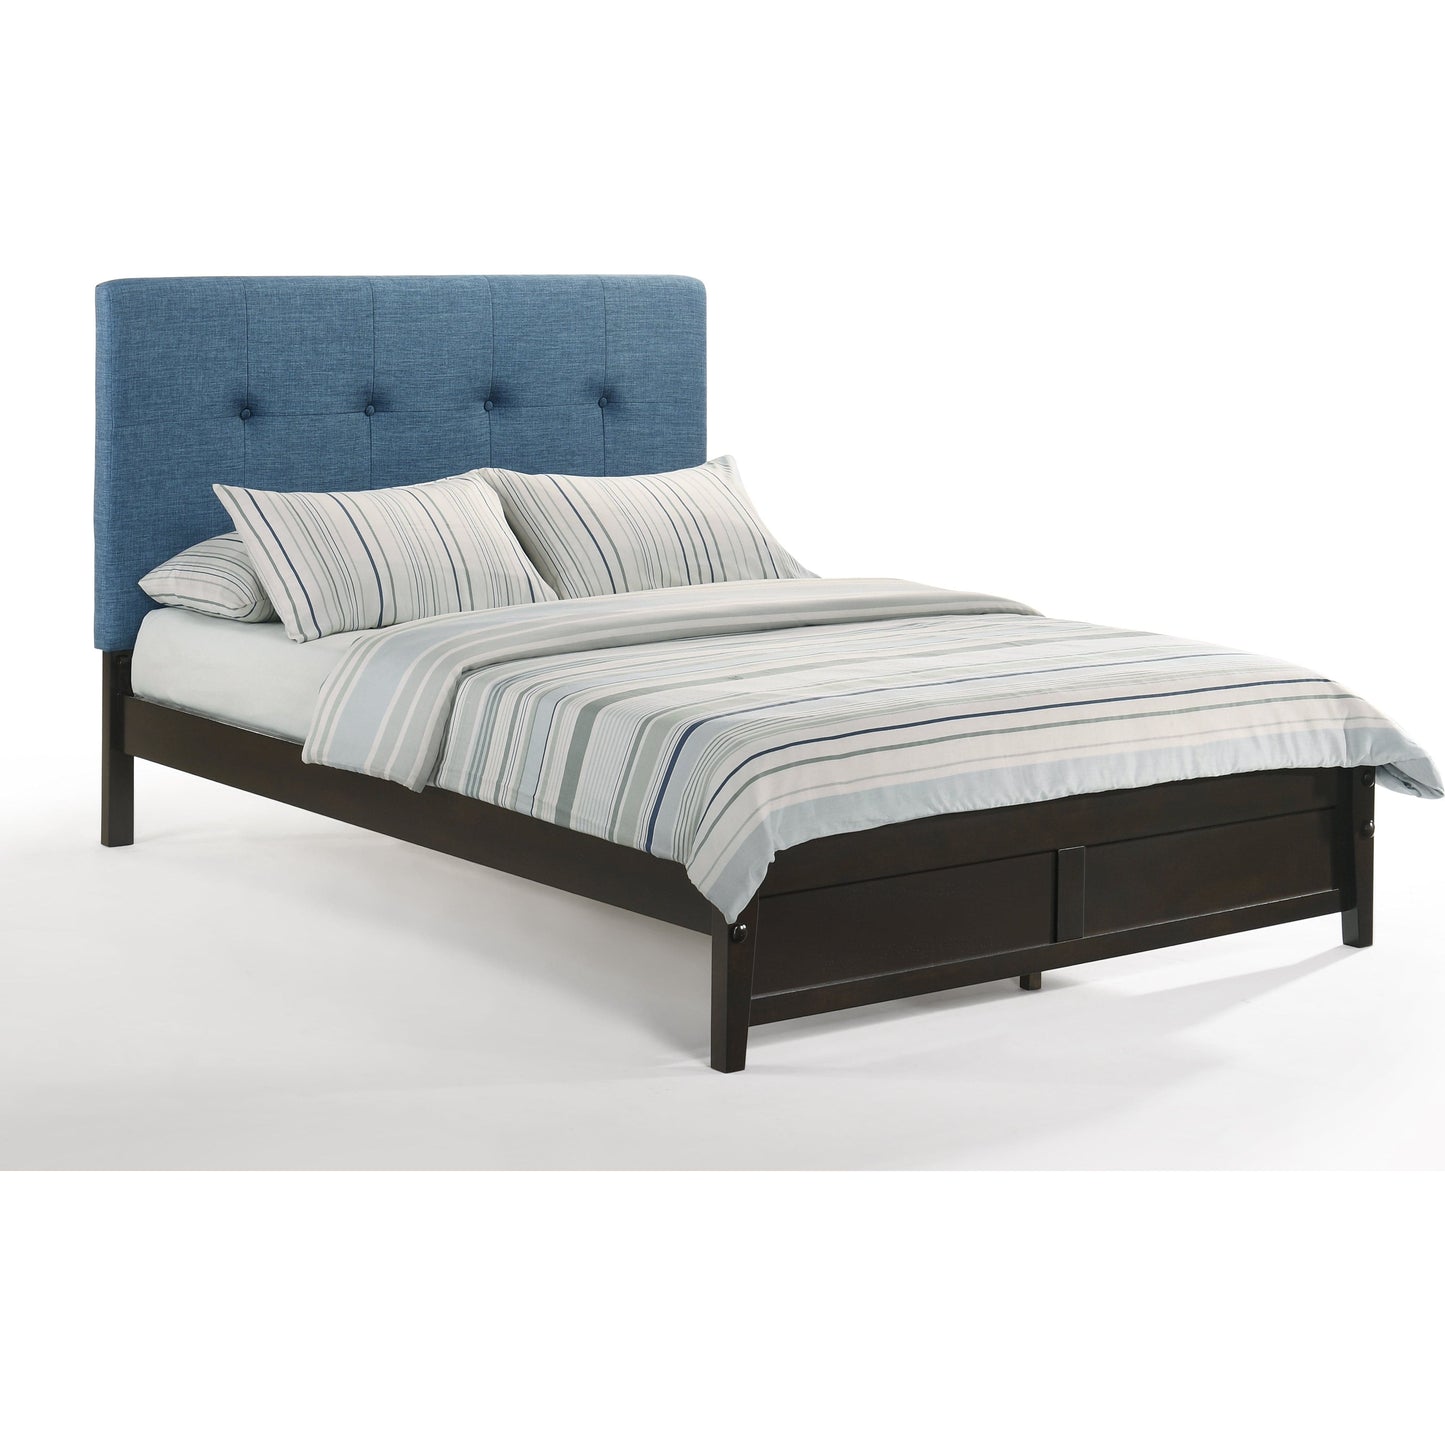 Night And Day Paprika King Bed in Charcoal with Chocolate Finish Frame (P Series) Teal PAP-PH-EKG-TL-CHO-COM